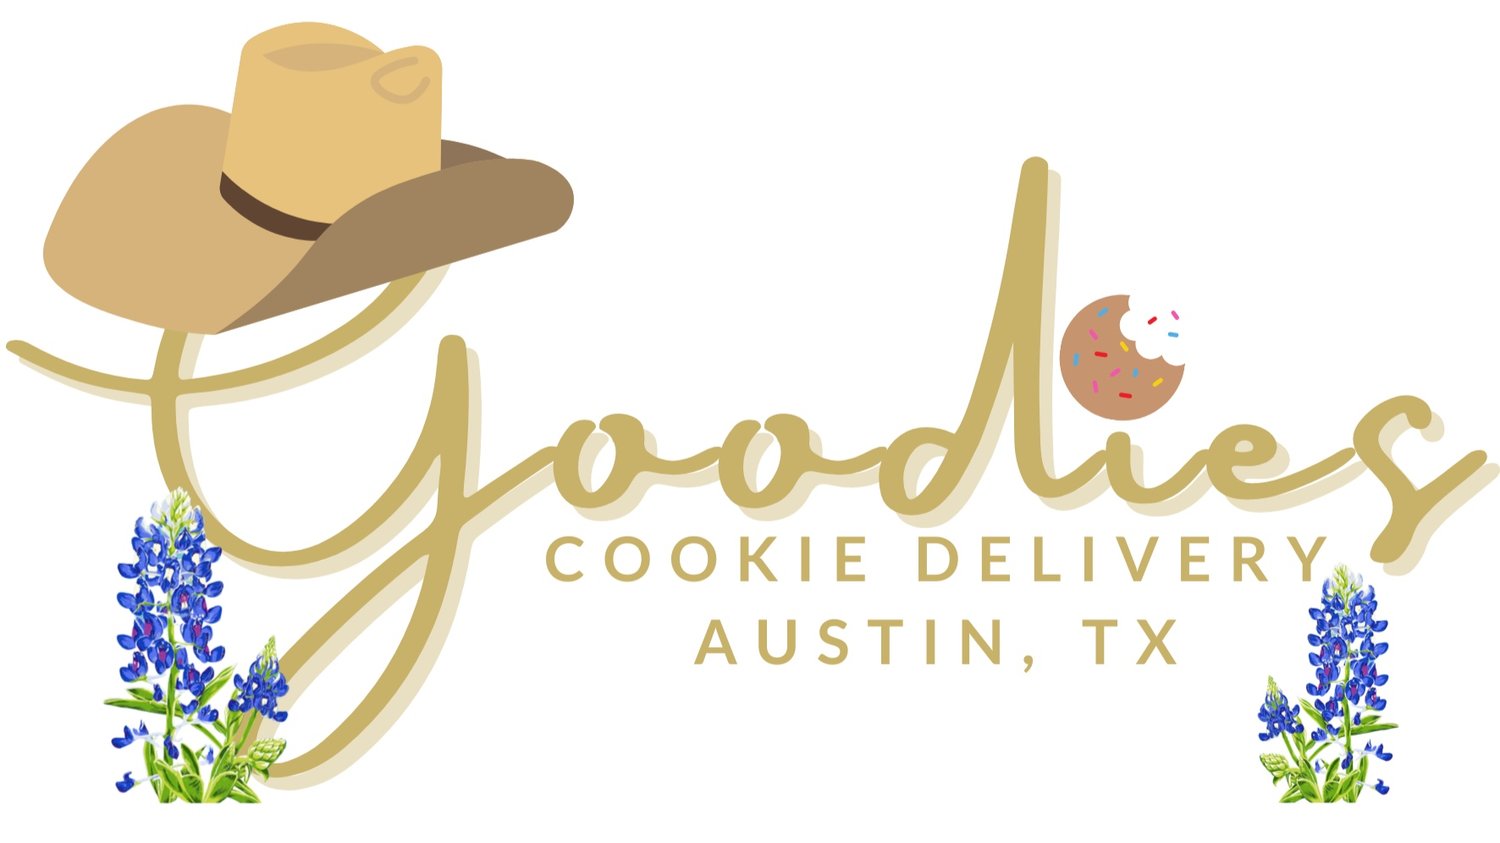 Goodies Cookie Delivery Austin, TX